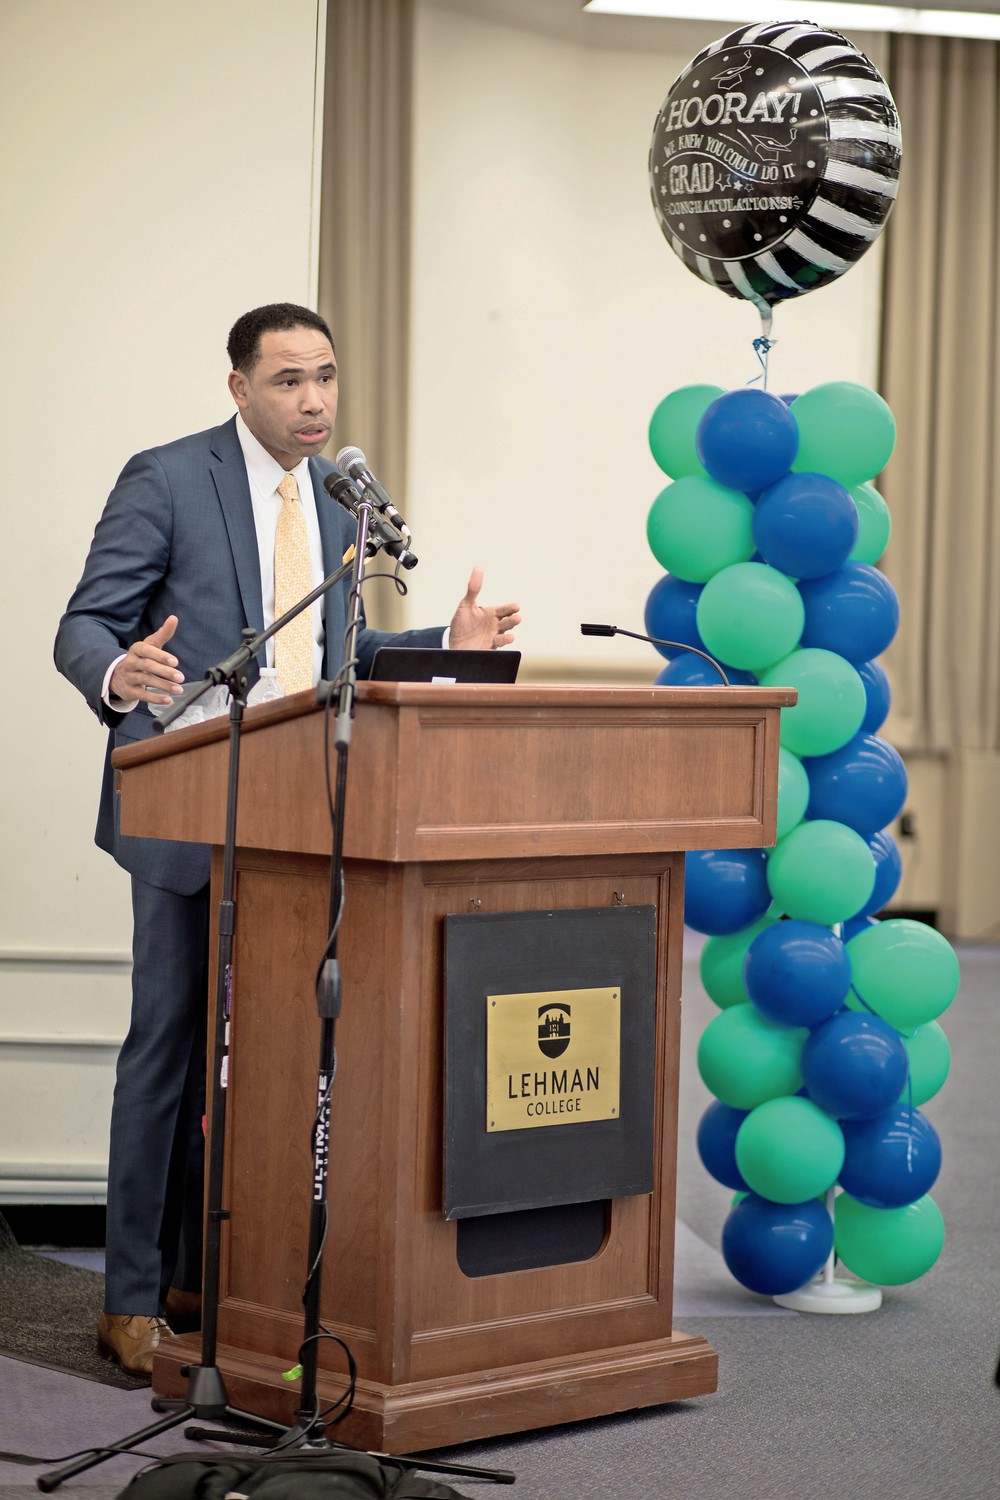 Lawrence Fauntleroy talks about his long path towards a college degree at 49 years old at Lehman College. Fauntleroy is one of many students in the adult degree program being inducted into the national honor society, Upsilon Sigma of Alpha Sigma Lambda, for the first time.